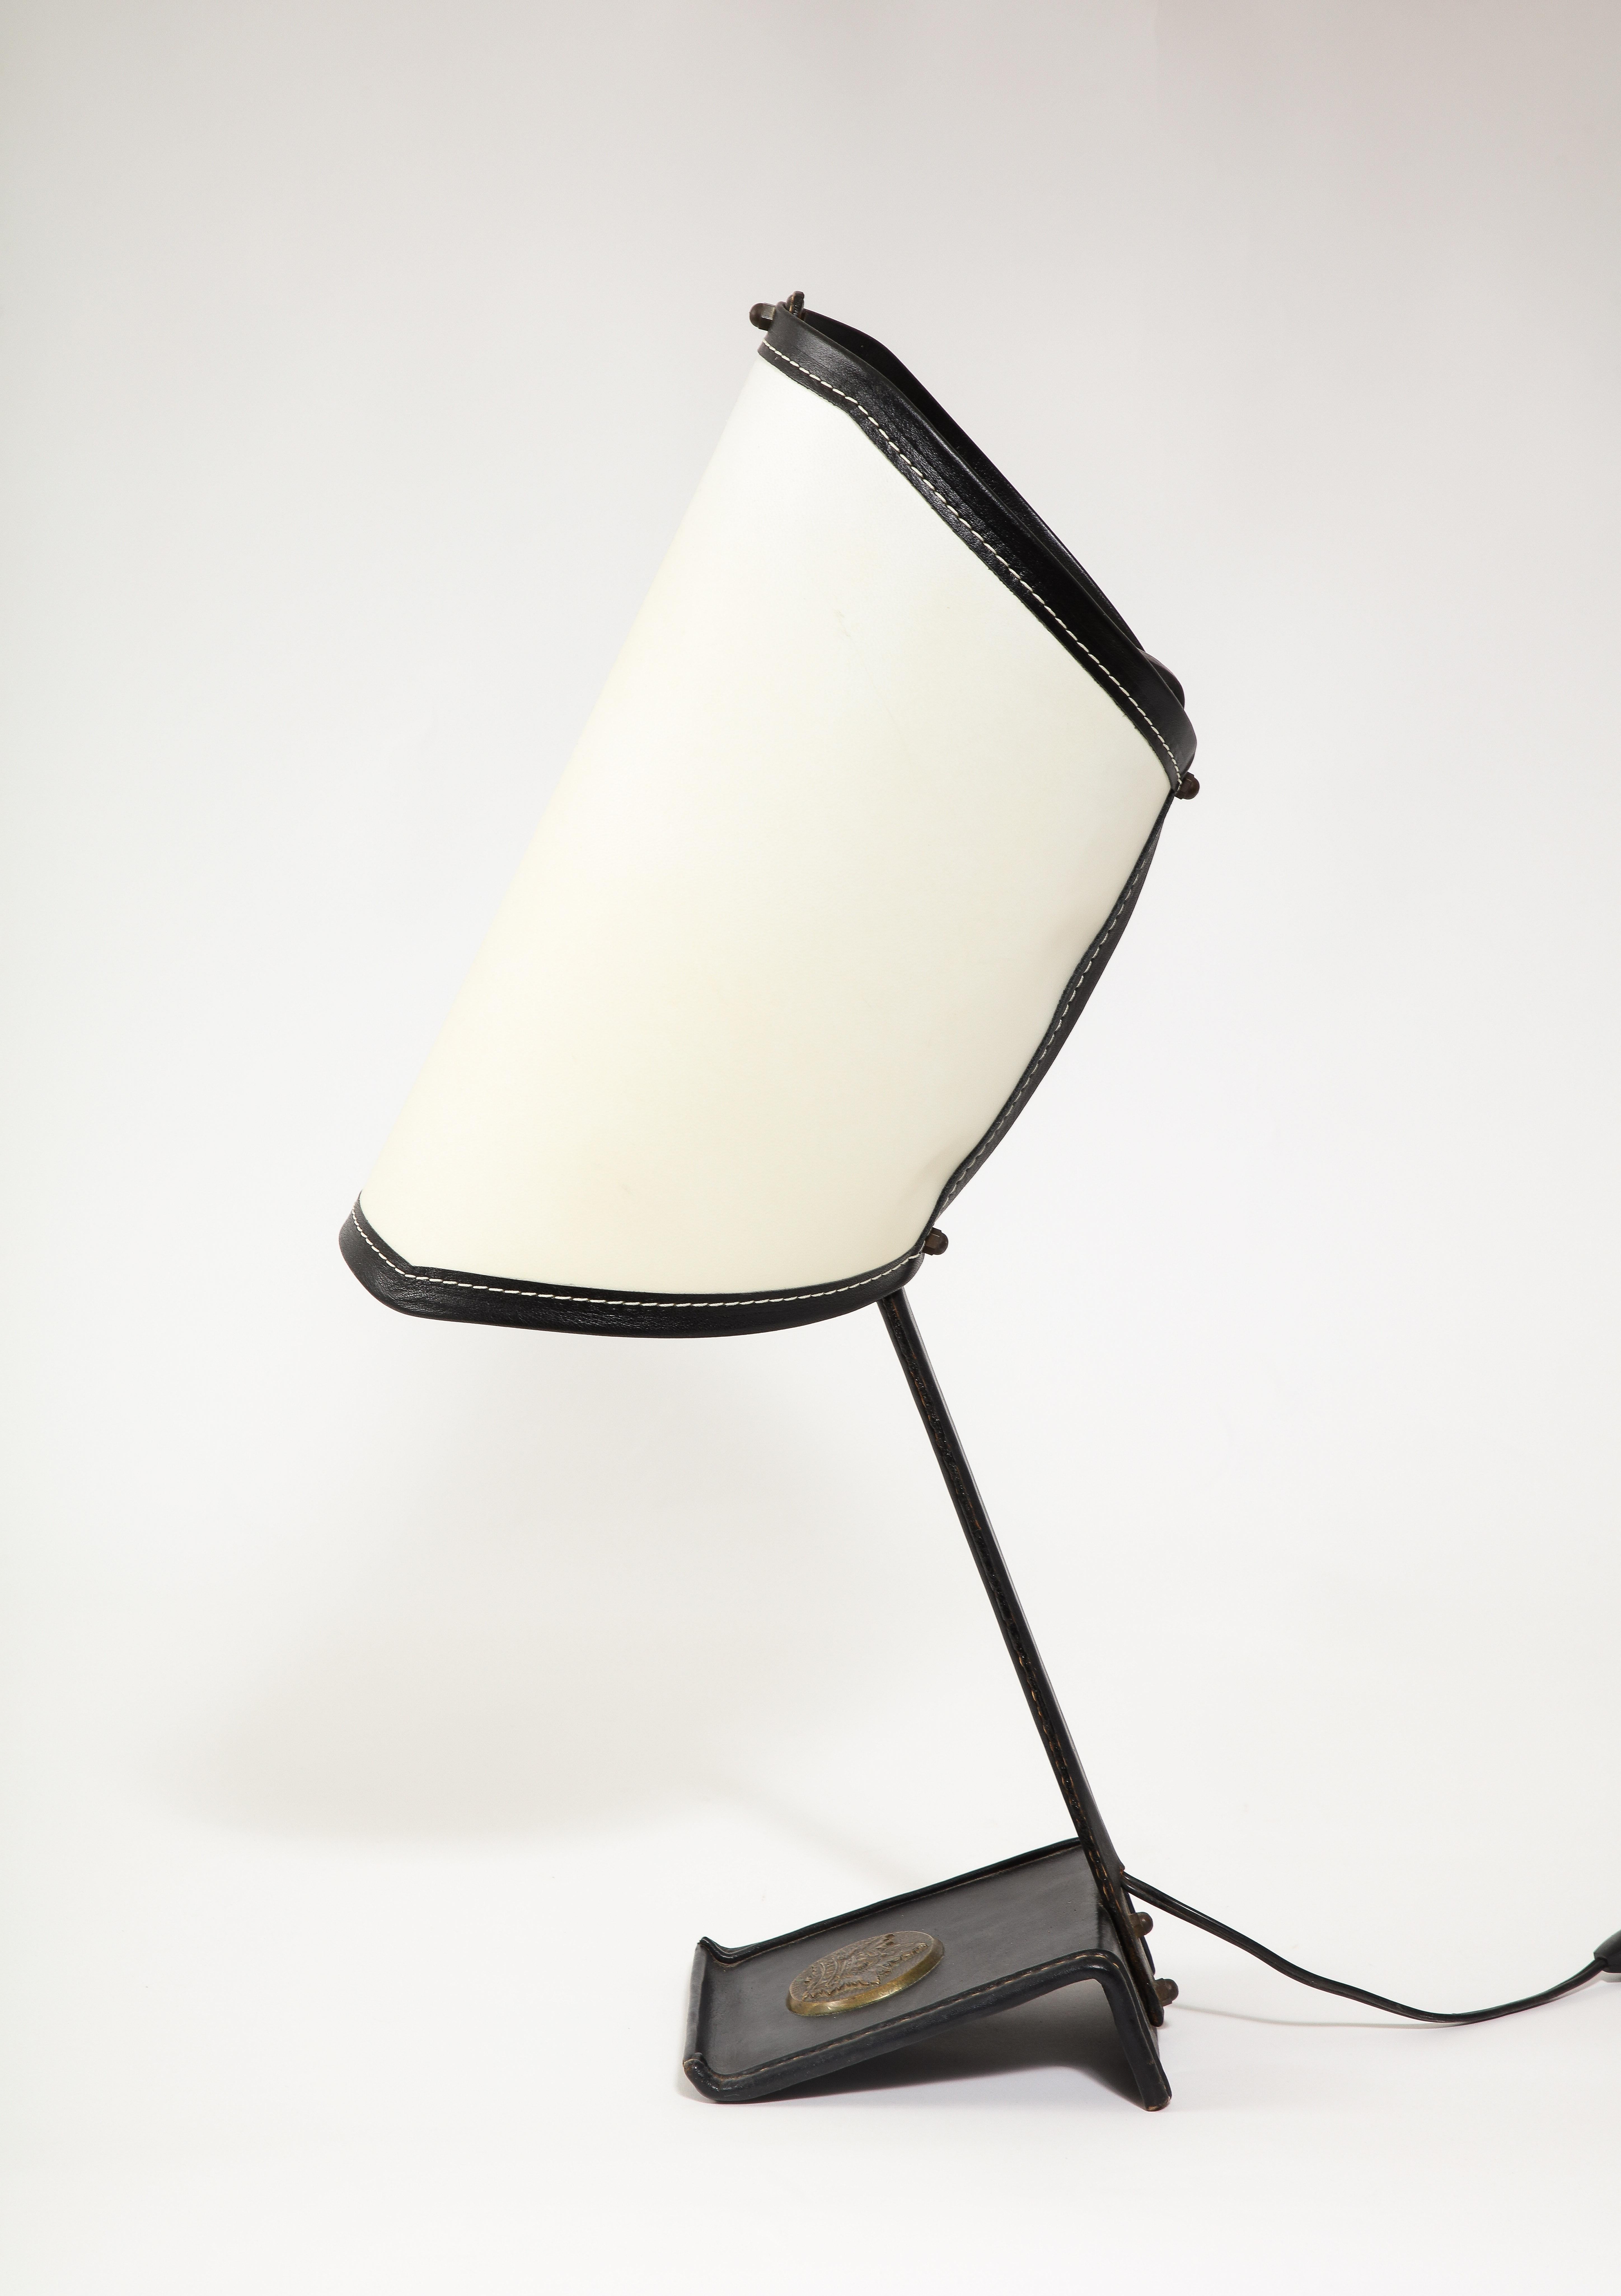 Jacques Adnet Curved Desk Lamp With Black Leather Trim, France 1950's For Sale 1